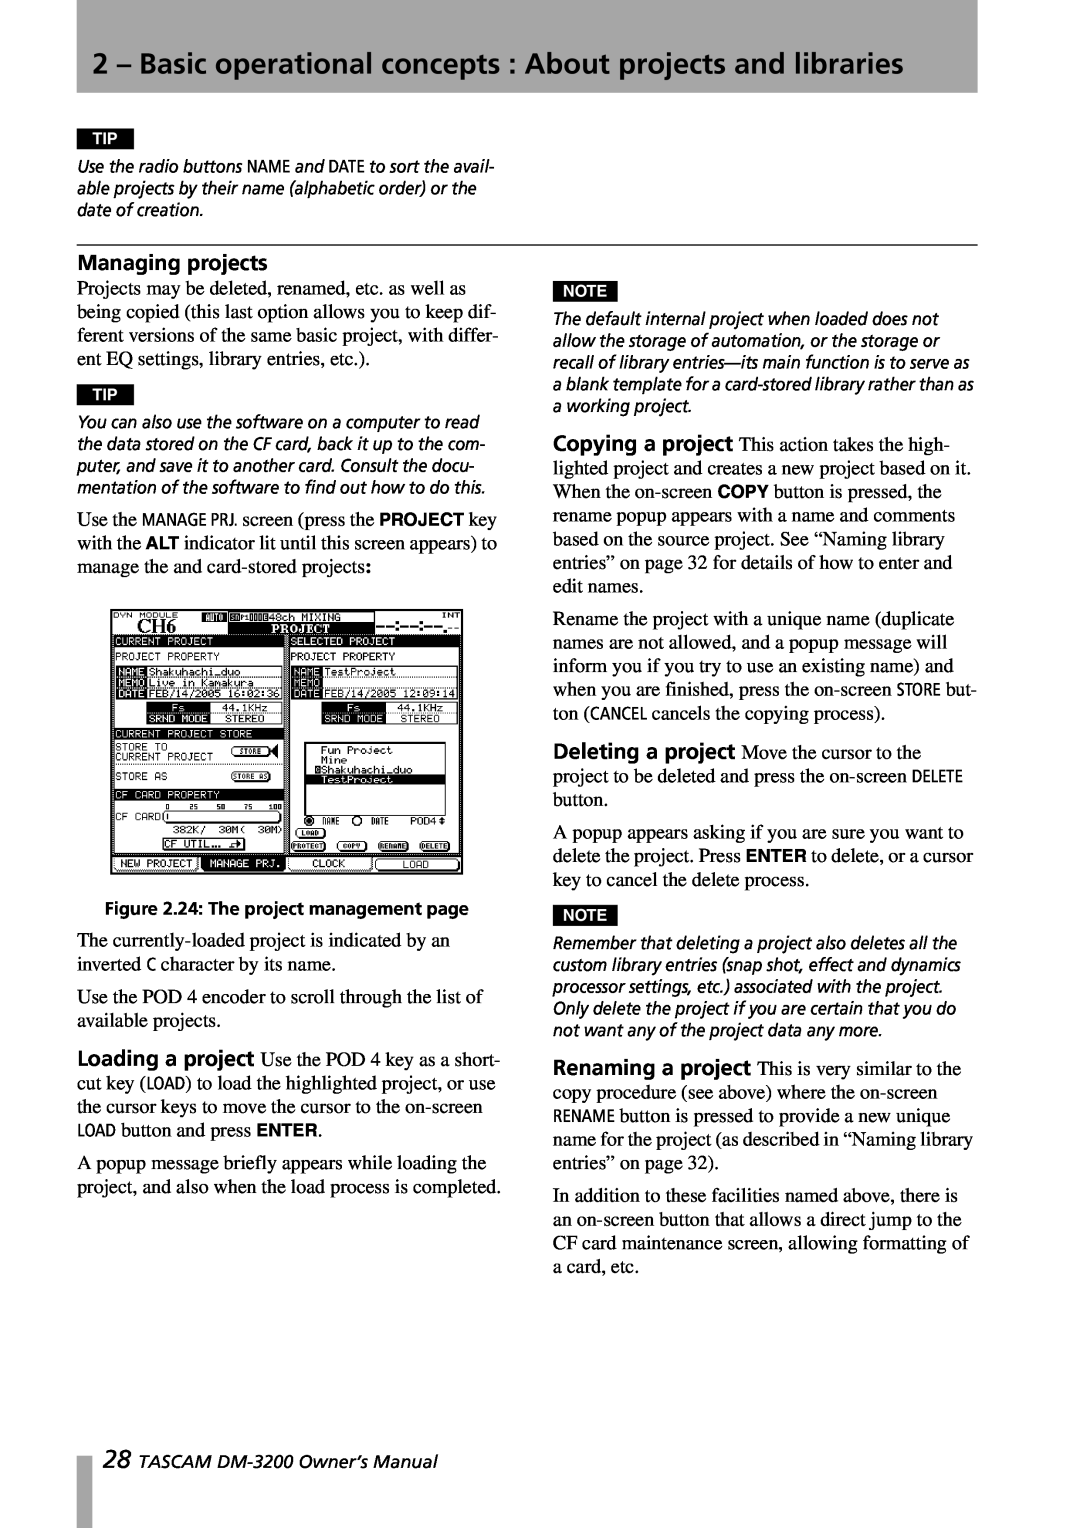 Tascam DM-3200 owner manual Managing projects, 24: The project management page 